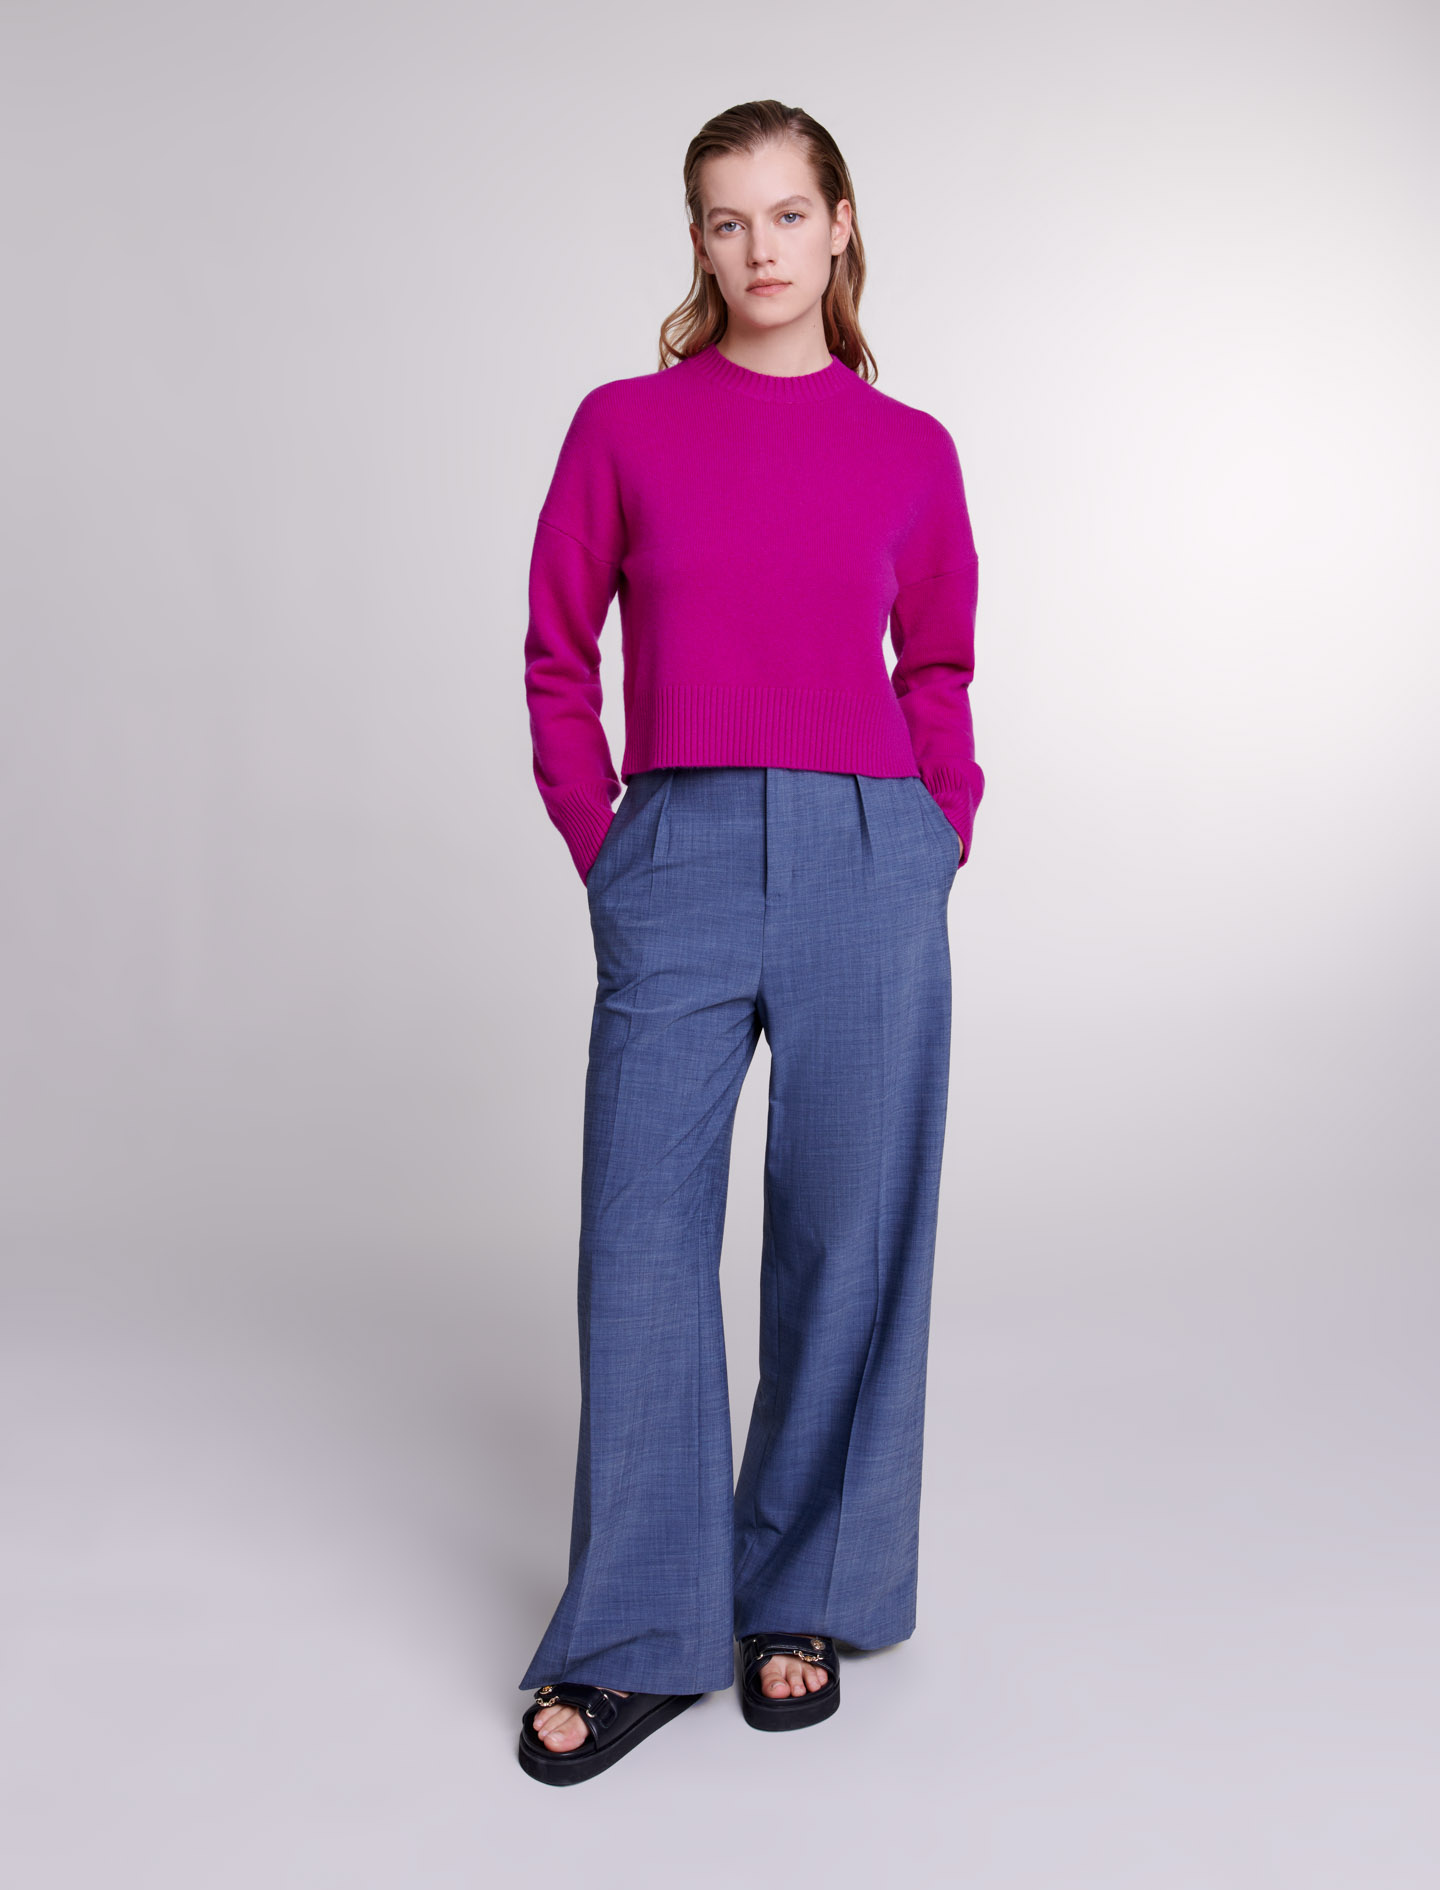 Maje Woman's cashmere, 224MEIGETY for Spring/Summer, in color Fuchsia pink /